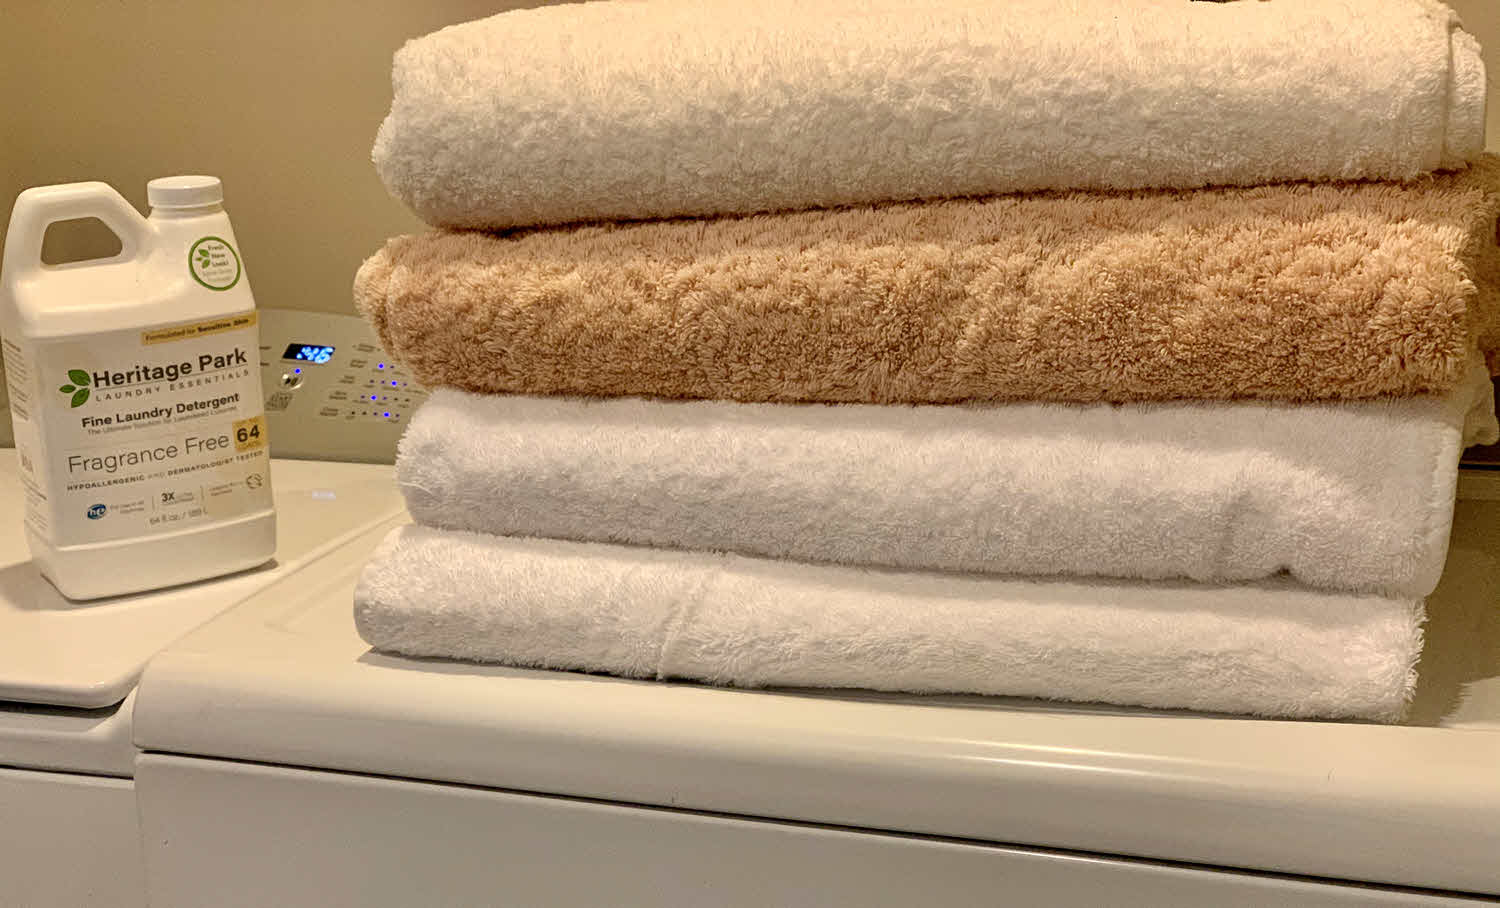 https://cdn.shopify.com/s/files/1/1035/1721/files/Stack-of-clean-towels-on-top-dryer-03.jpg?v=1604527873